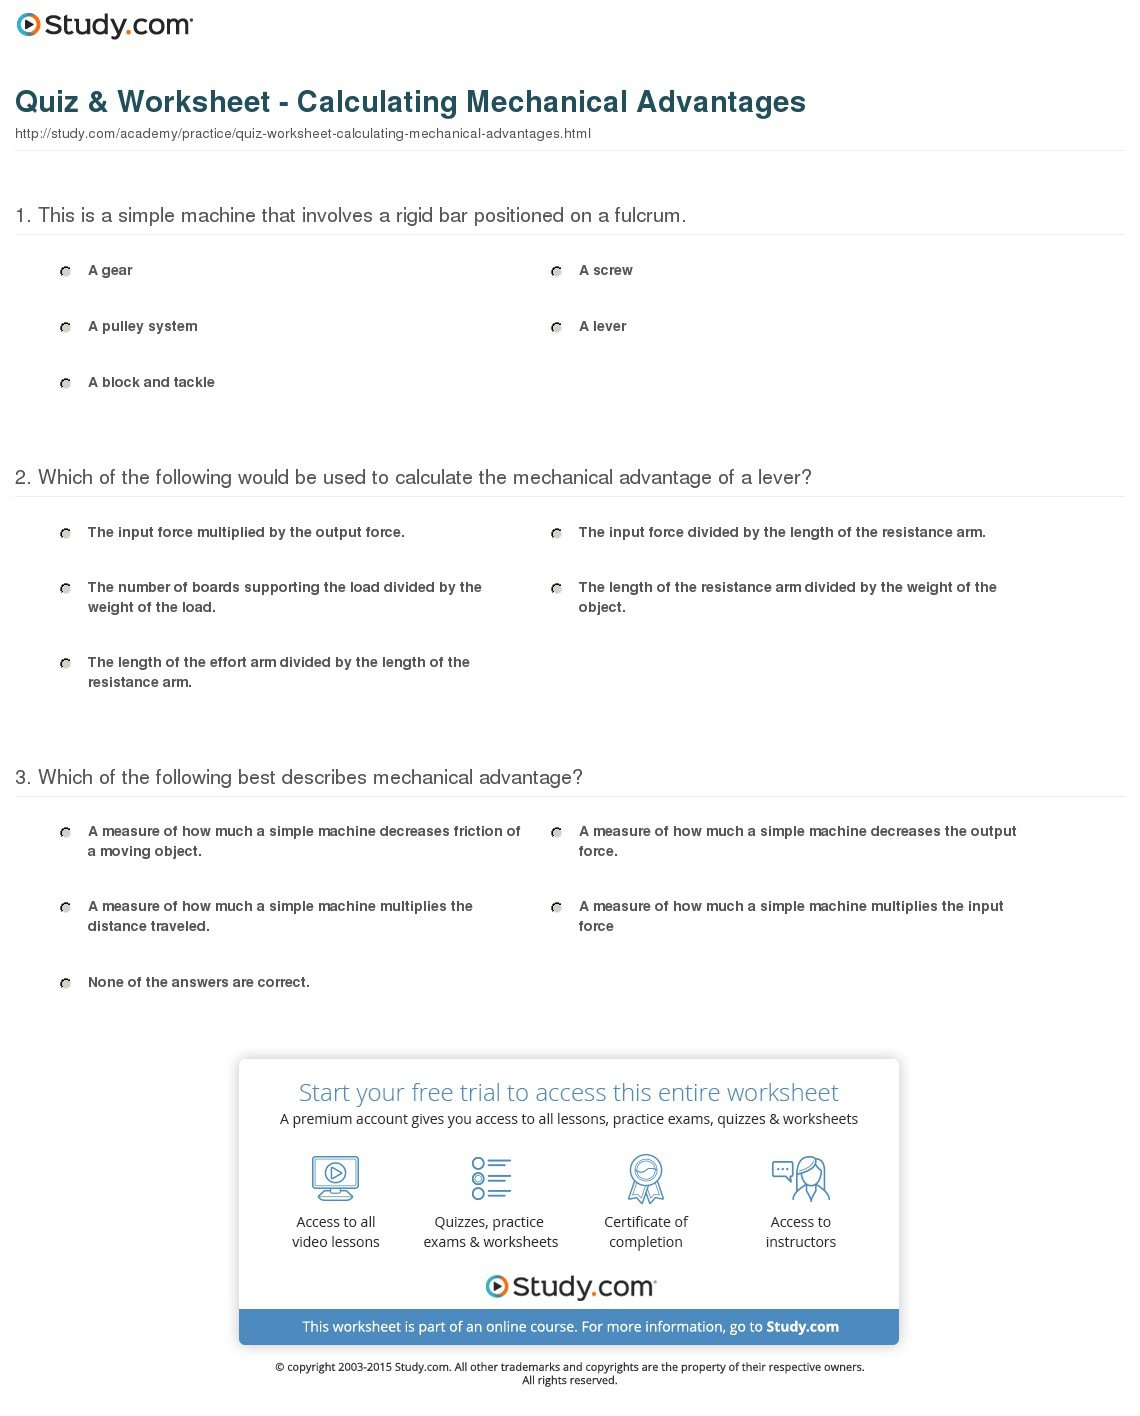 Quiz  Worksheet  Calculating Mechanical Advantages  Study Throughout Simple Machines And Mechanical Advantage Worksheet Answers